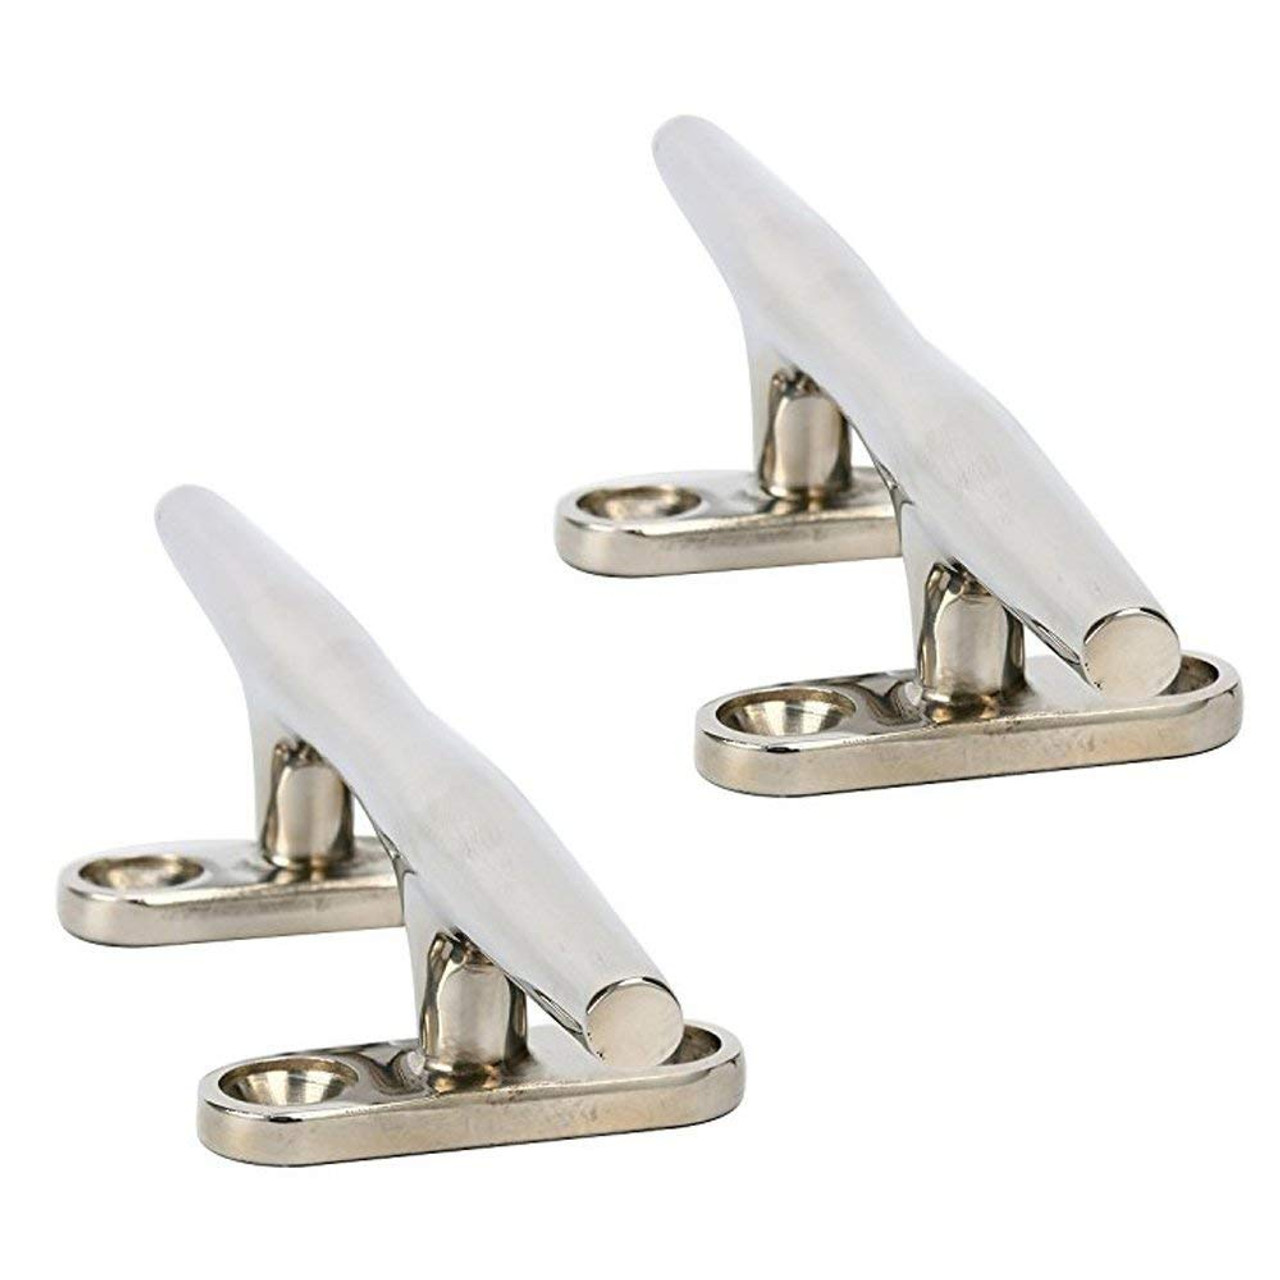 Amarine Made 4pcs Stainless Steel Open Base Cleat - 8"